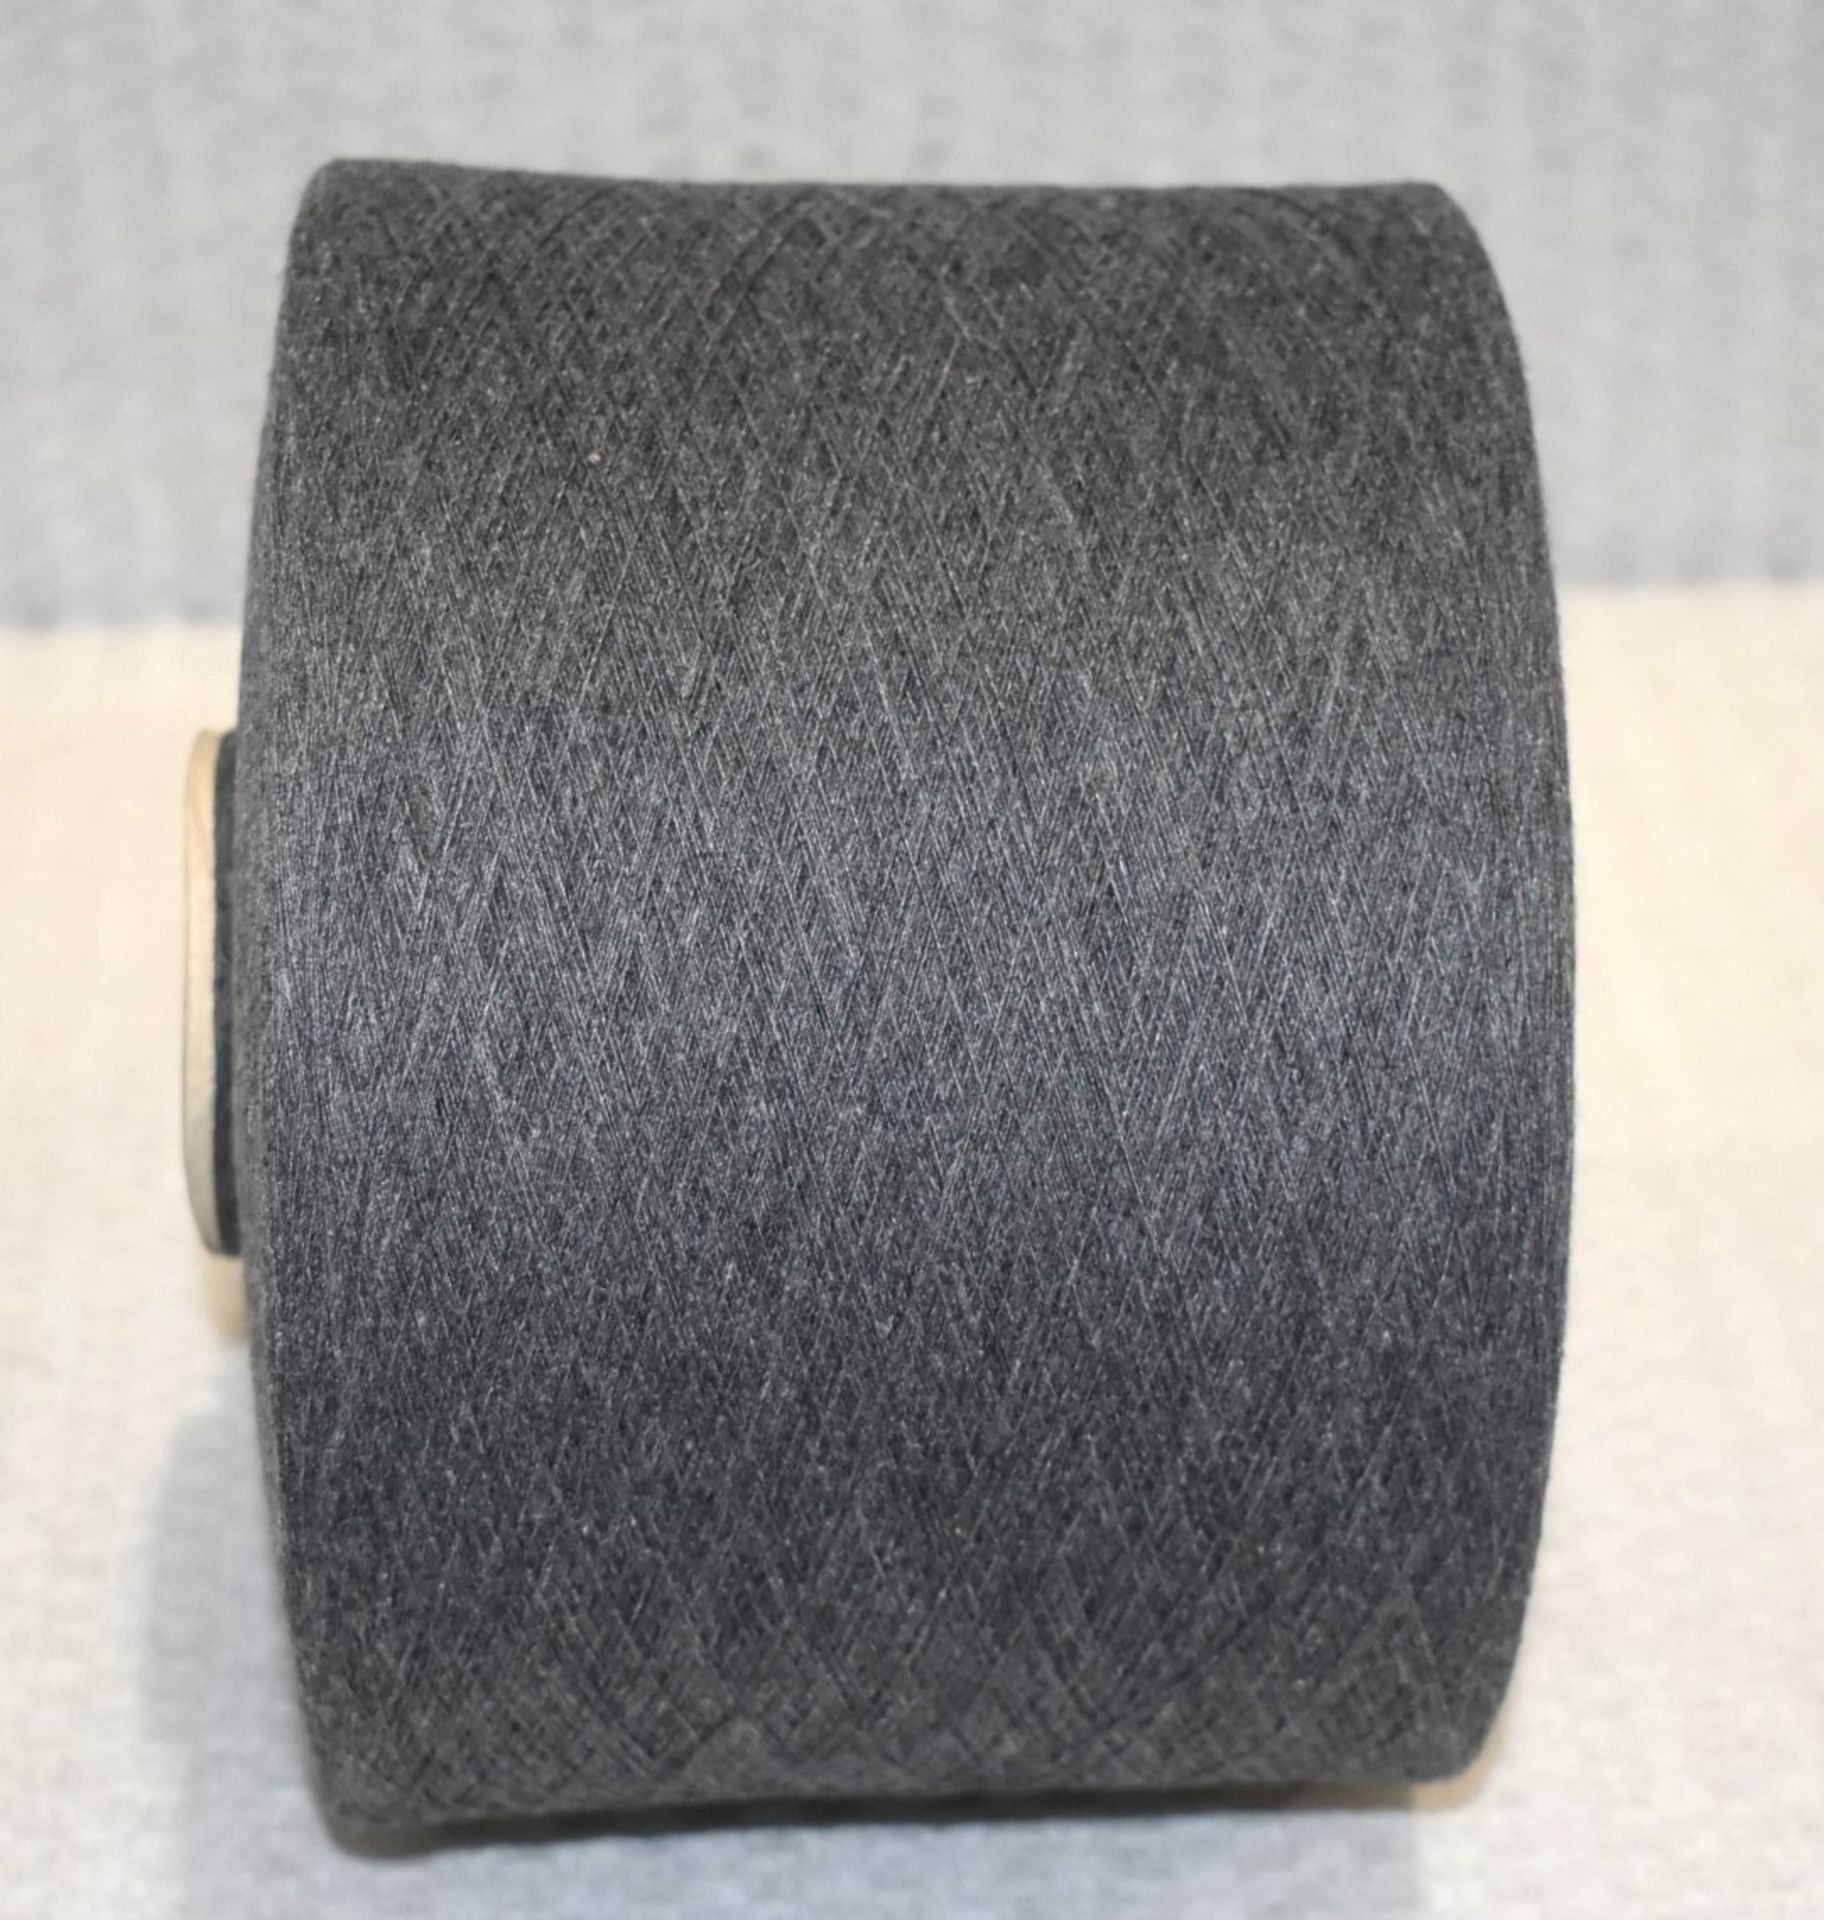 10 x Cones of 1/13 MicroCotton Knitting Yarn - Mid Grey - Approx Weight: 2,500g - New Stock ABL Yarn - Image 10 of 11